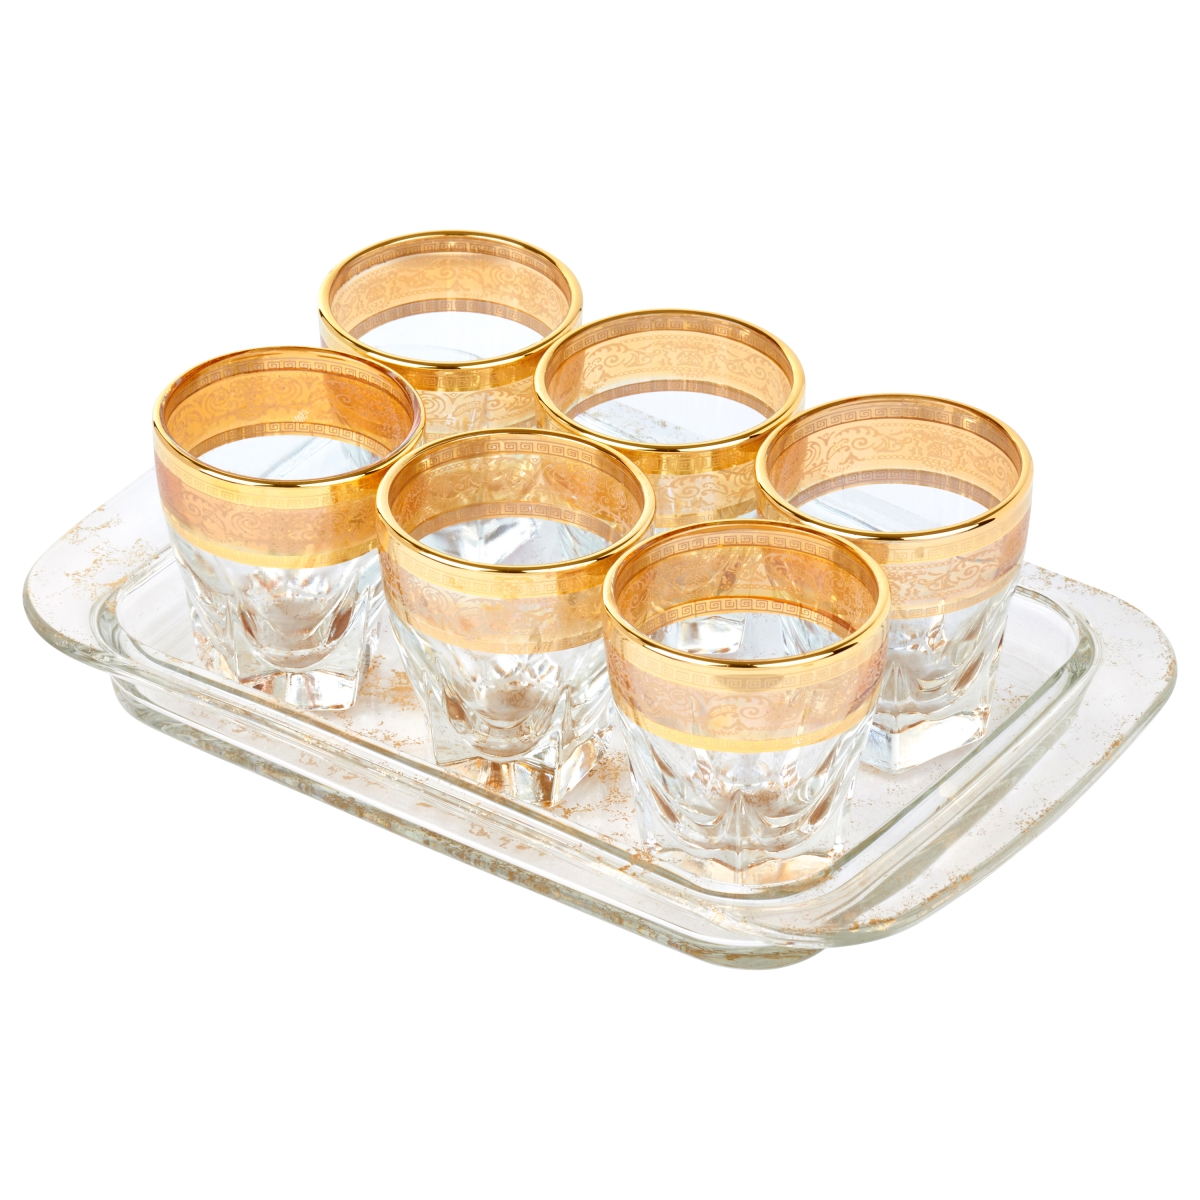 Picture of Lorenzo Import 9444 7 Piece Tray Set Shots with Tray Amber Color